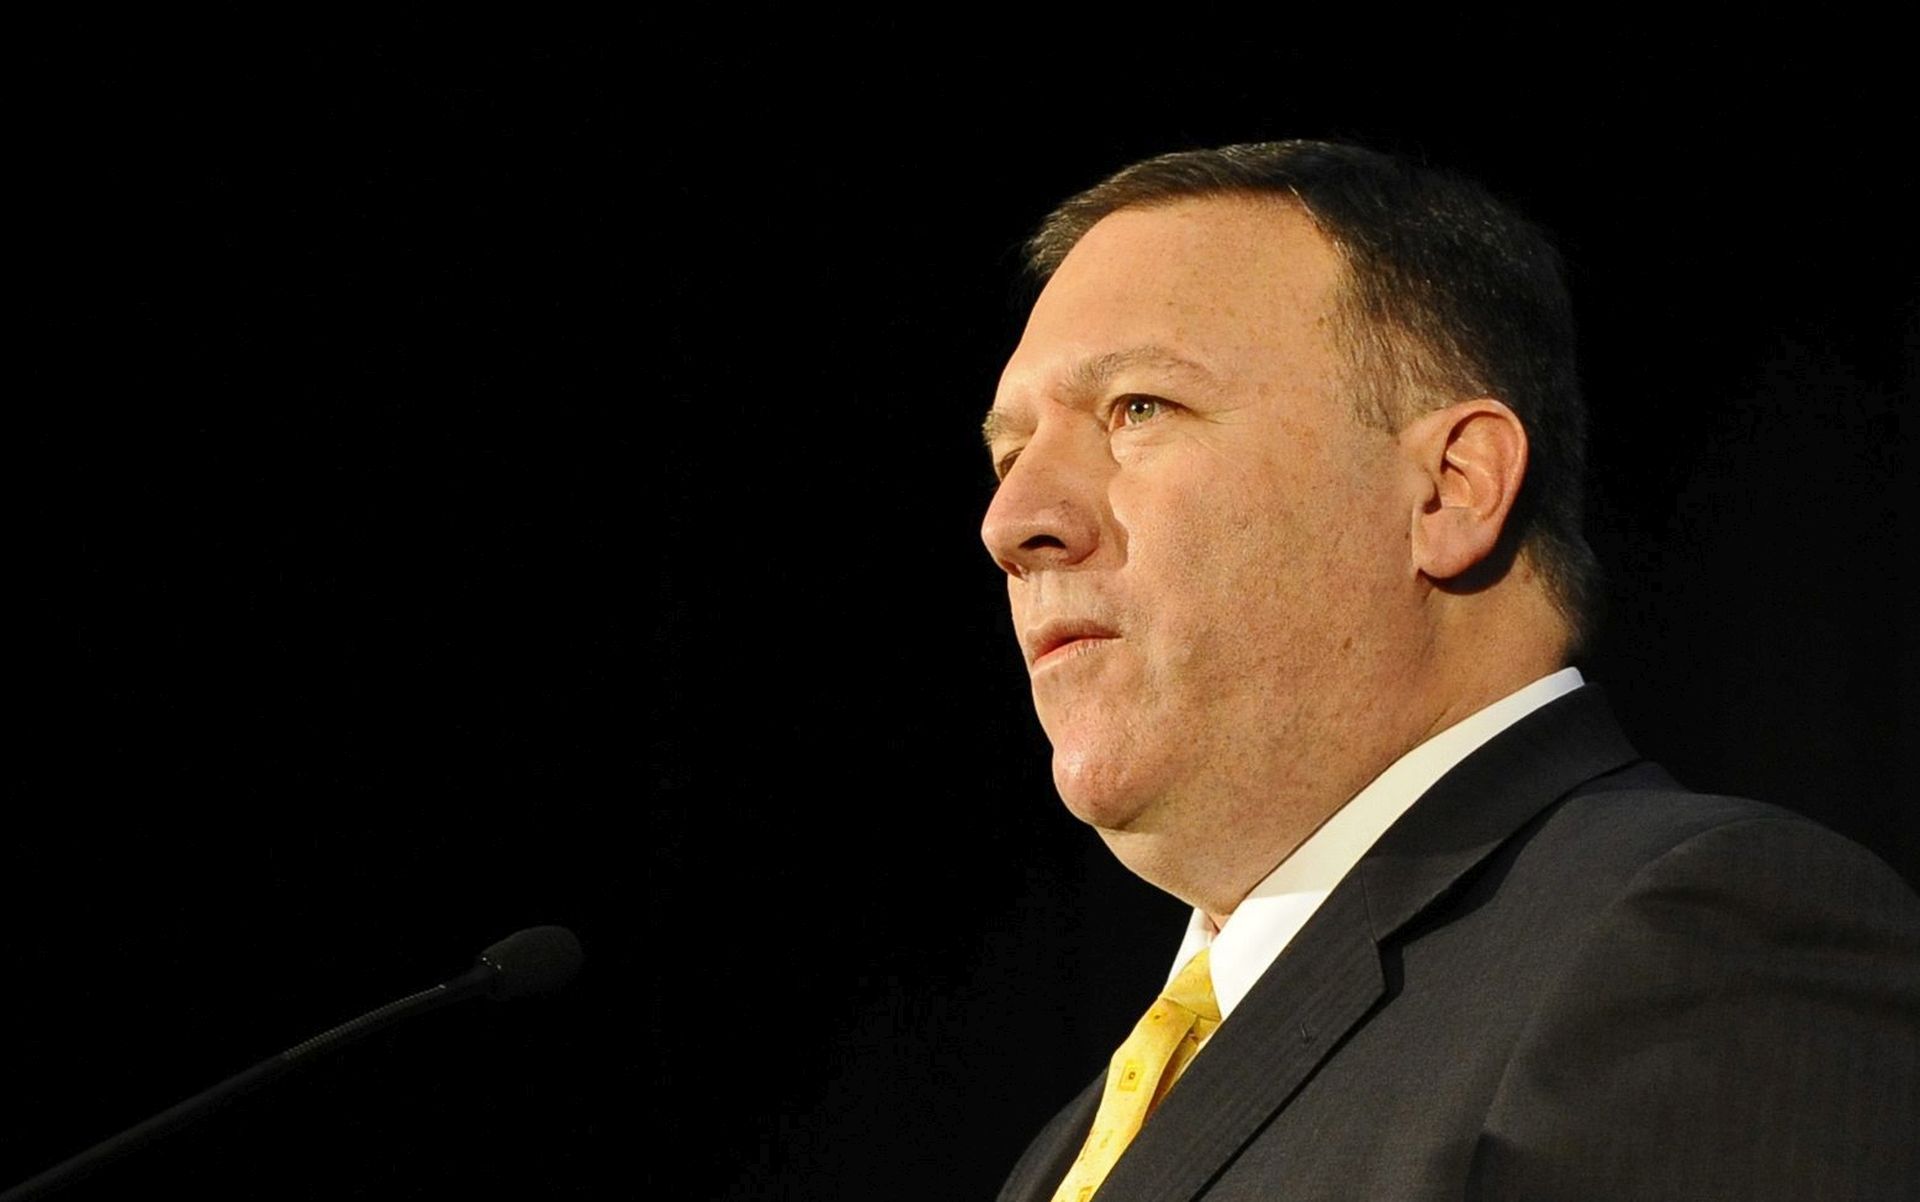 epa05636830 (FILE) A file picture dated 25 February 2011 shows US Congressman Mike Pompeo during a press conference at the Boeing Defense, Space and Security Facility in Wichita, Kansas, USA. According to media reports on 18 November 2016 citing anonymous transition officials, Pompeo has been offered the post as CIA director by president-elect Donald Trump.  EPA/LARRY W. SMITH